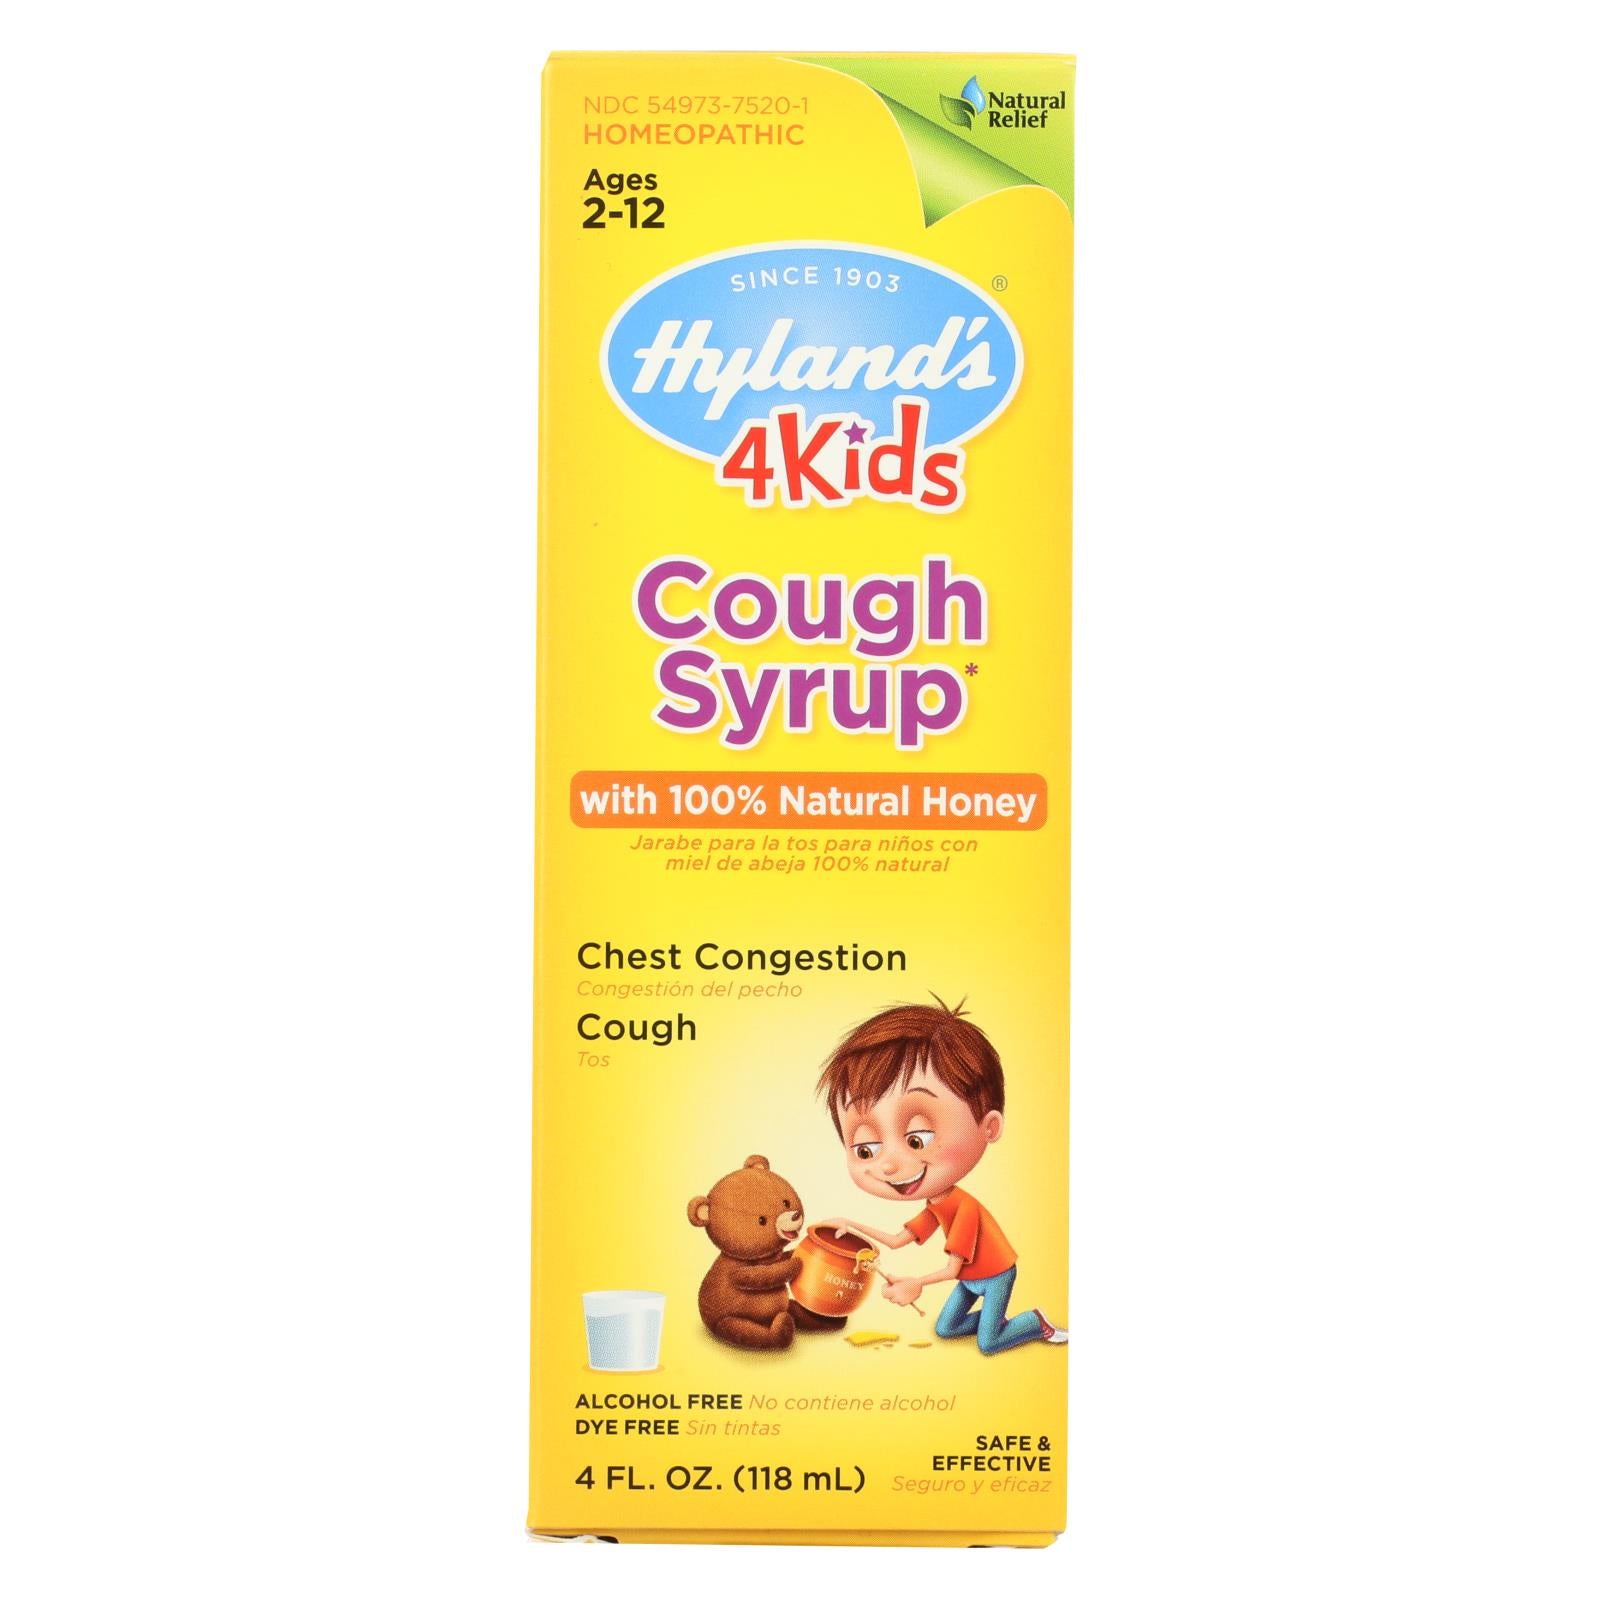 Hylands Homeopathic Cough Syrup - 100 Percent Natural Honey - 4 Kids - 4 Oz